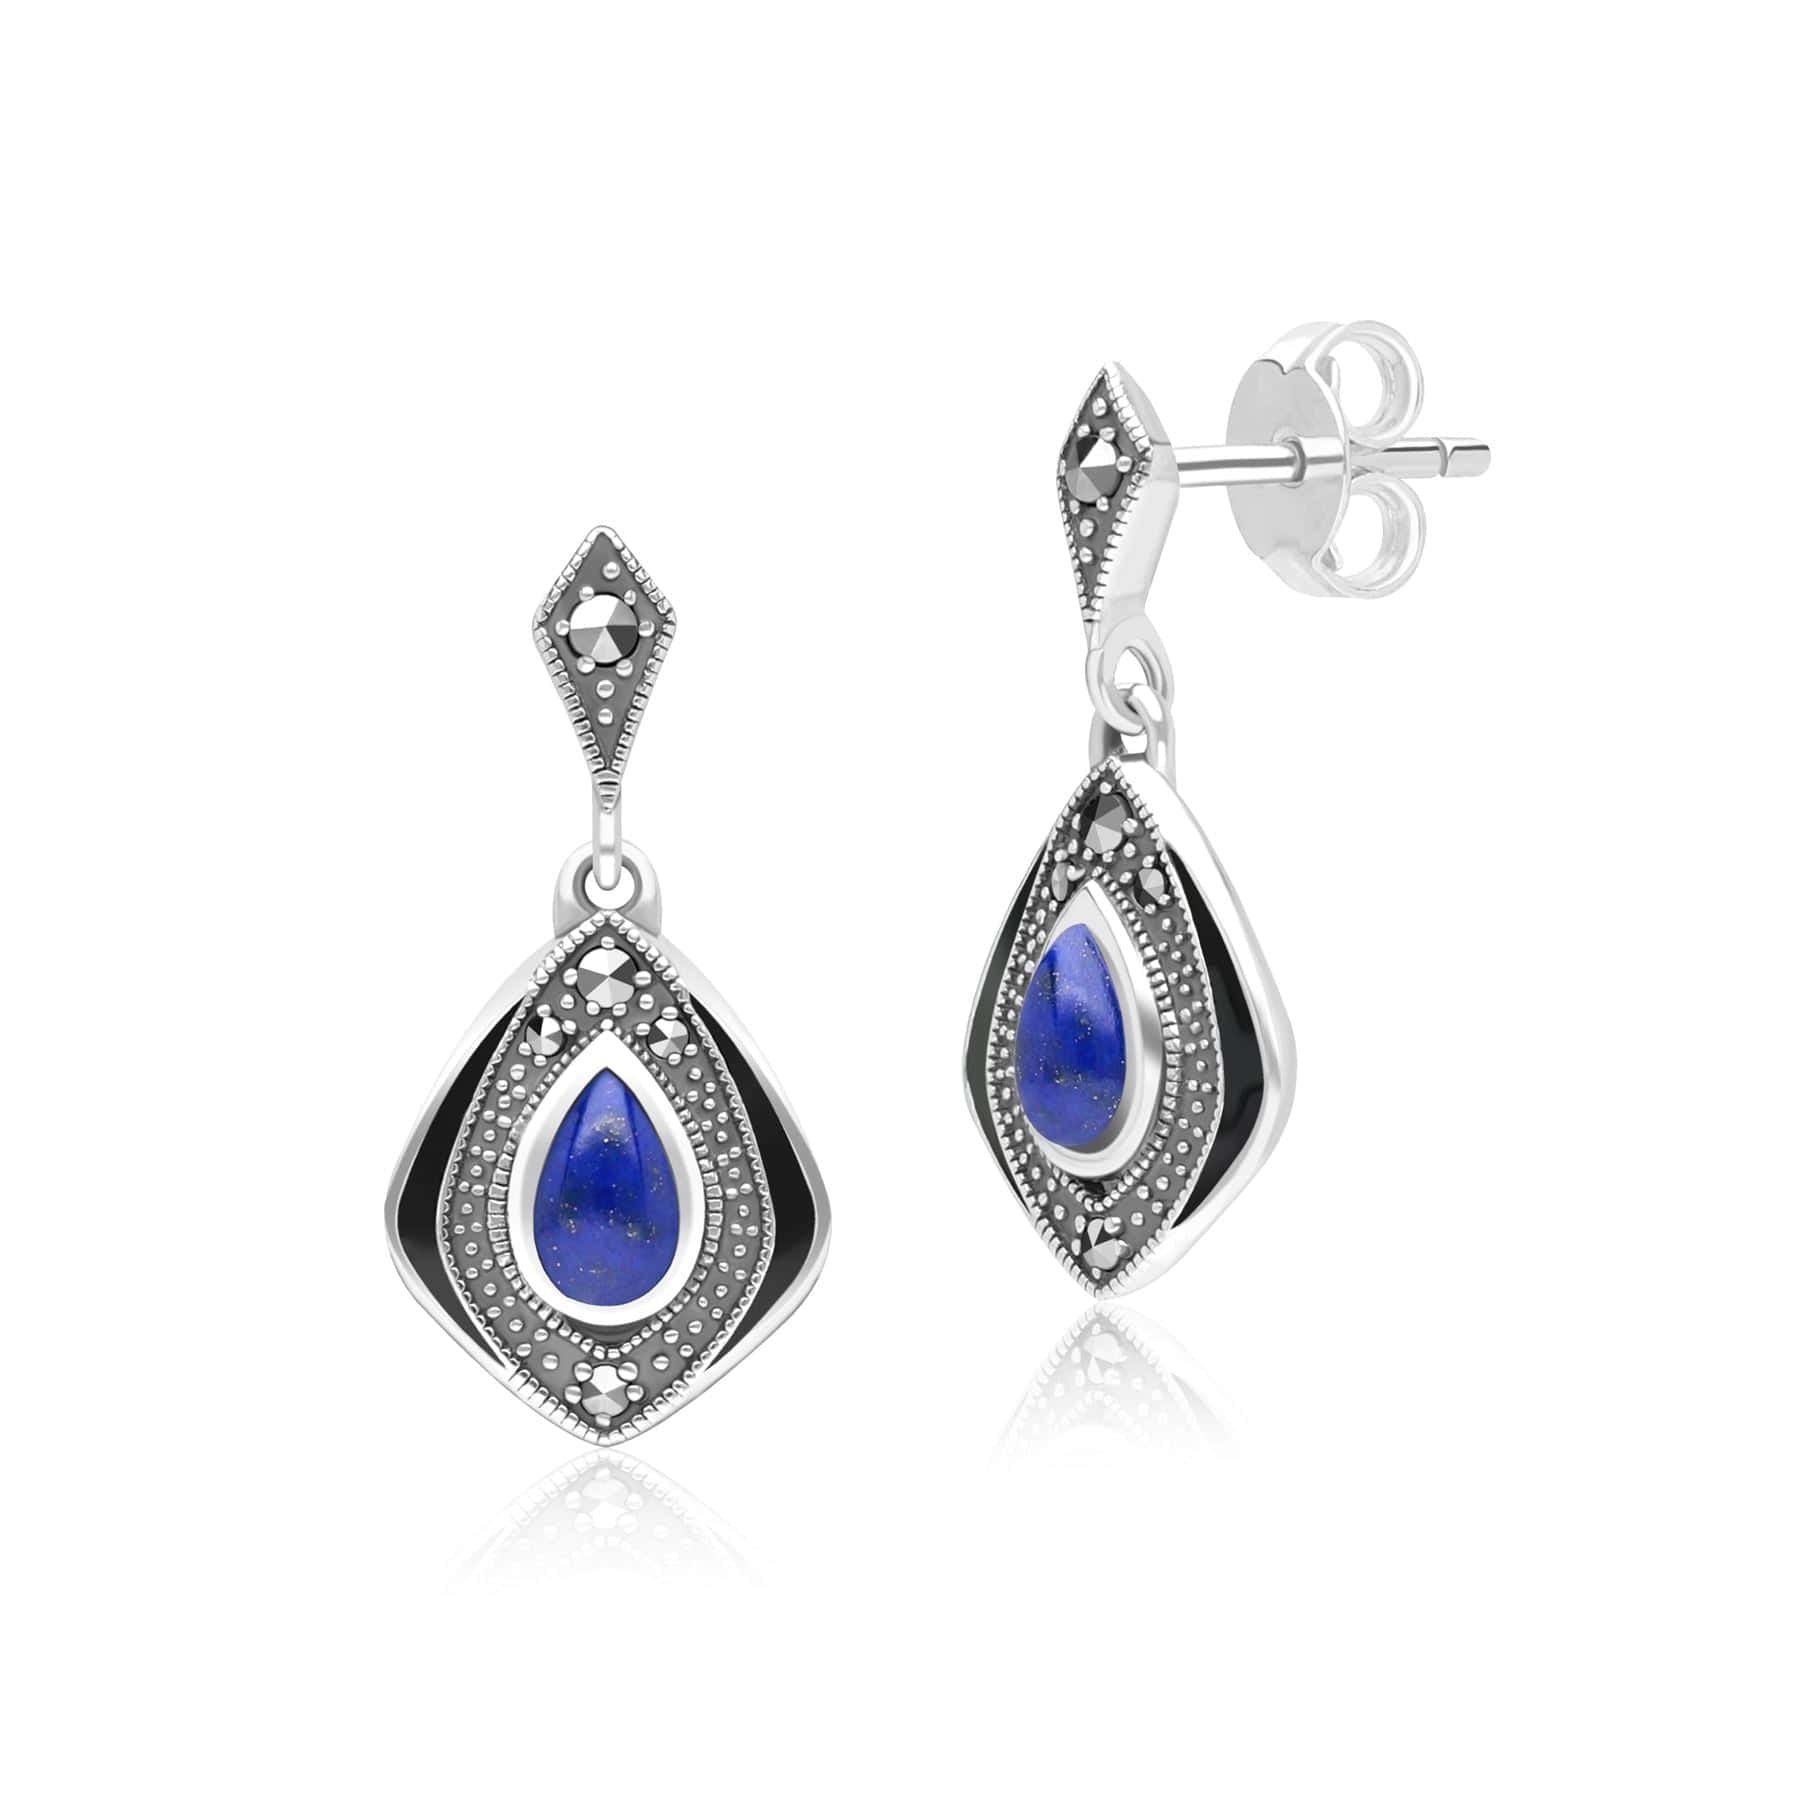 Art Deco Style Kite Lapis Lazuli and Marcasite Drop Earrings in Sterling Silver 214E936202925 